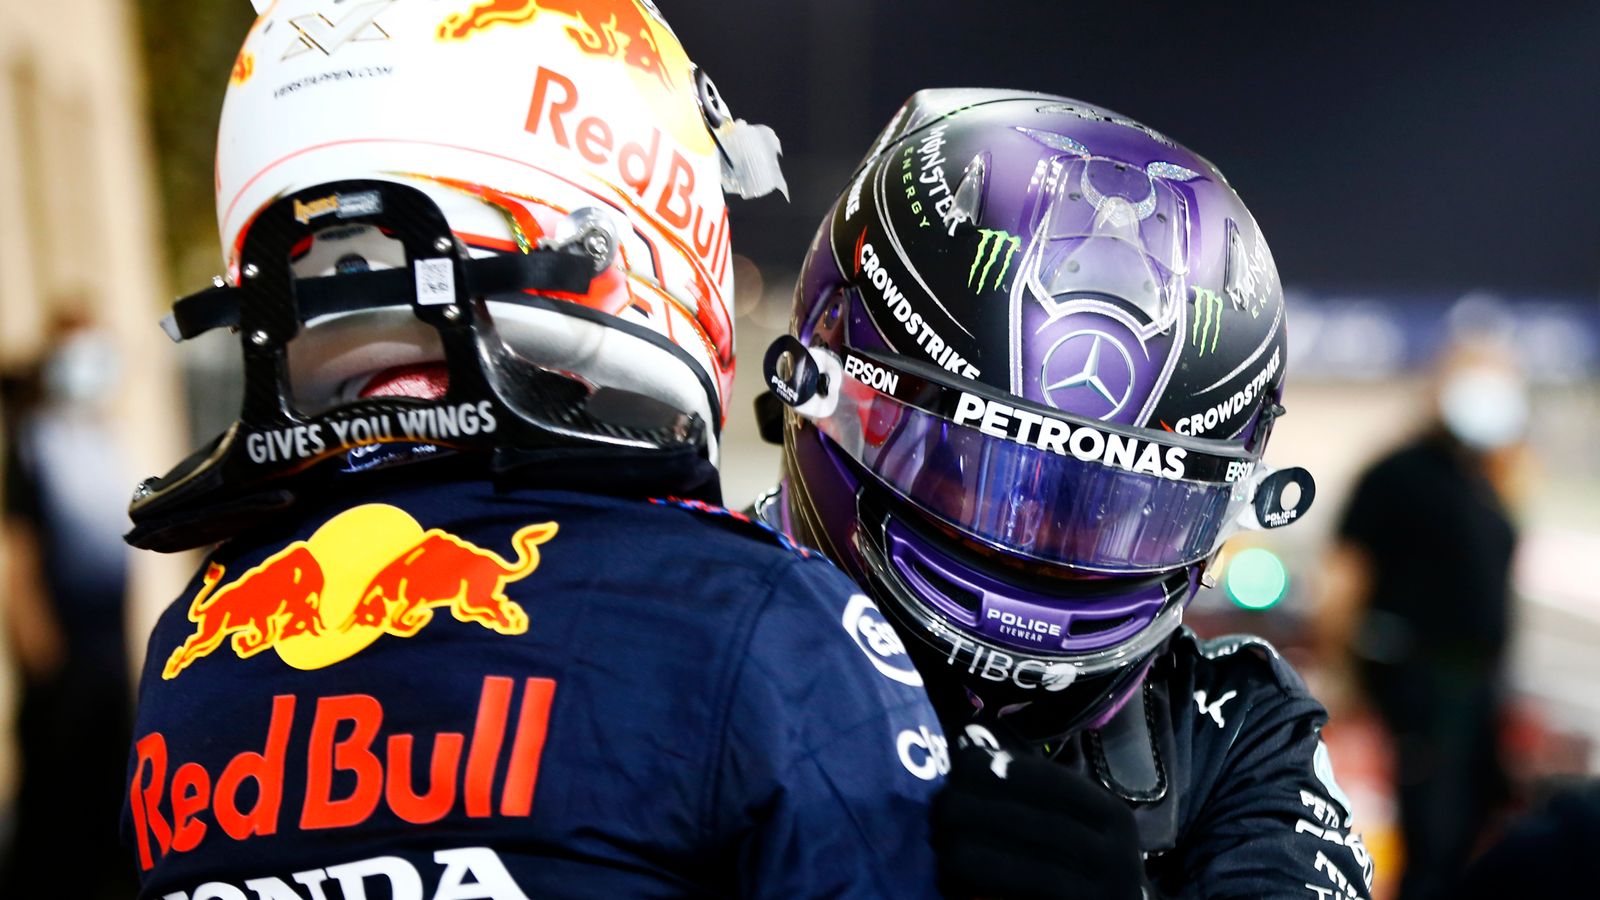 Lewis Hamilton and Mercedes eager for Max VerstappenRed Bull title